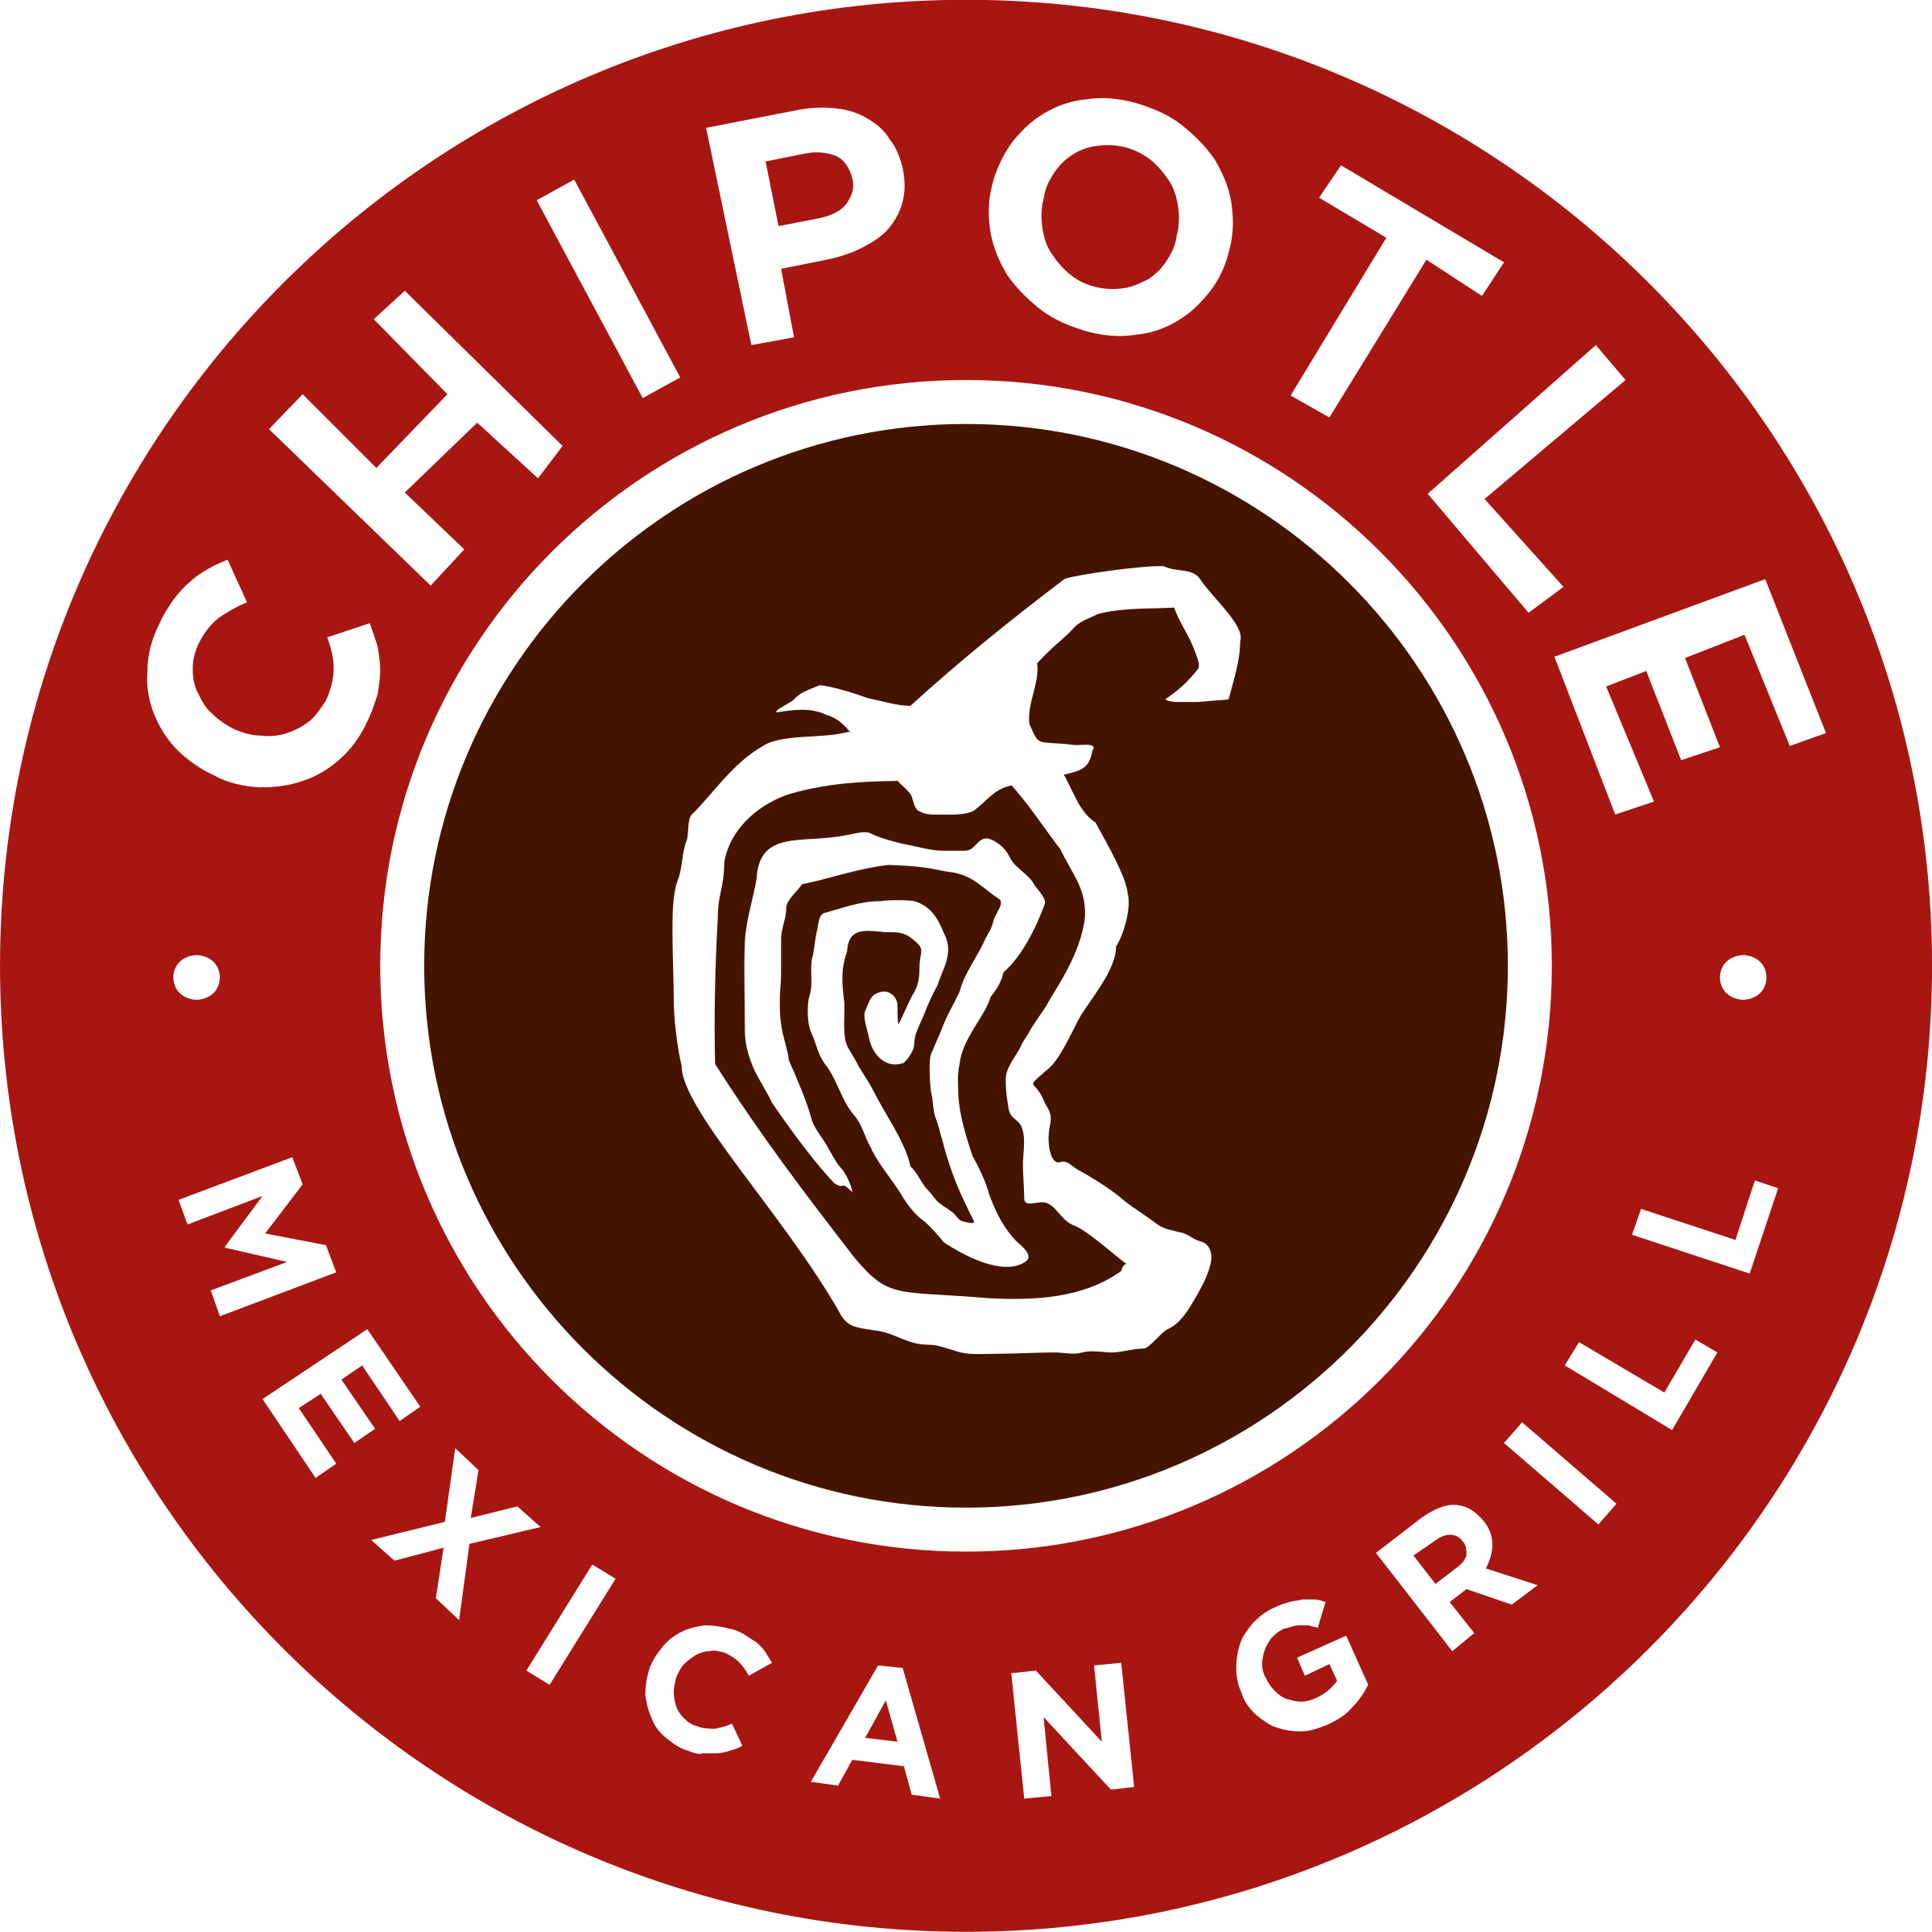 chipotle-mexican-grill-logo-png-transparent